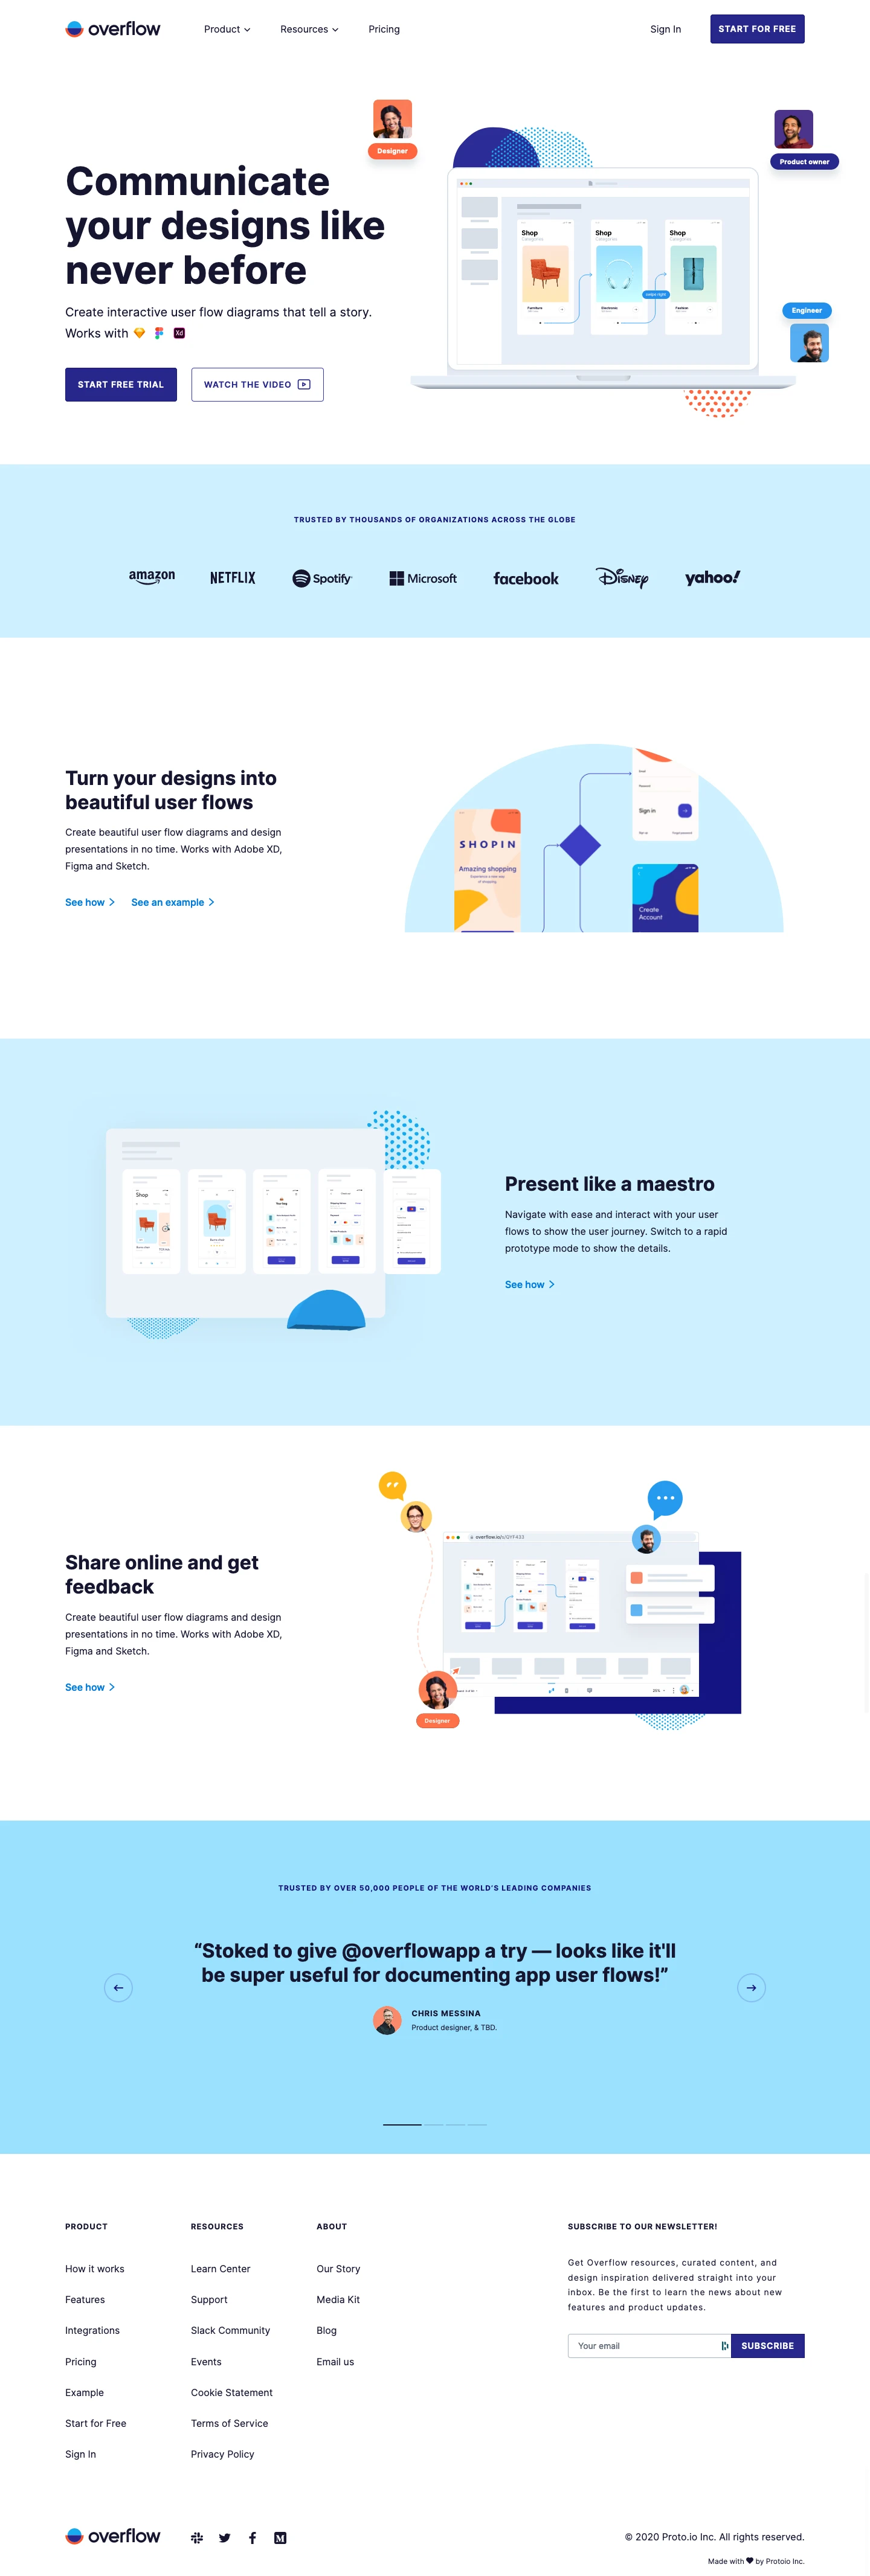 Overflow Landing Page Example: The world’s first user flow diagramming tool tailored for designers. Build and present beautiful user flow diagrams that tell a story.